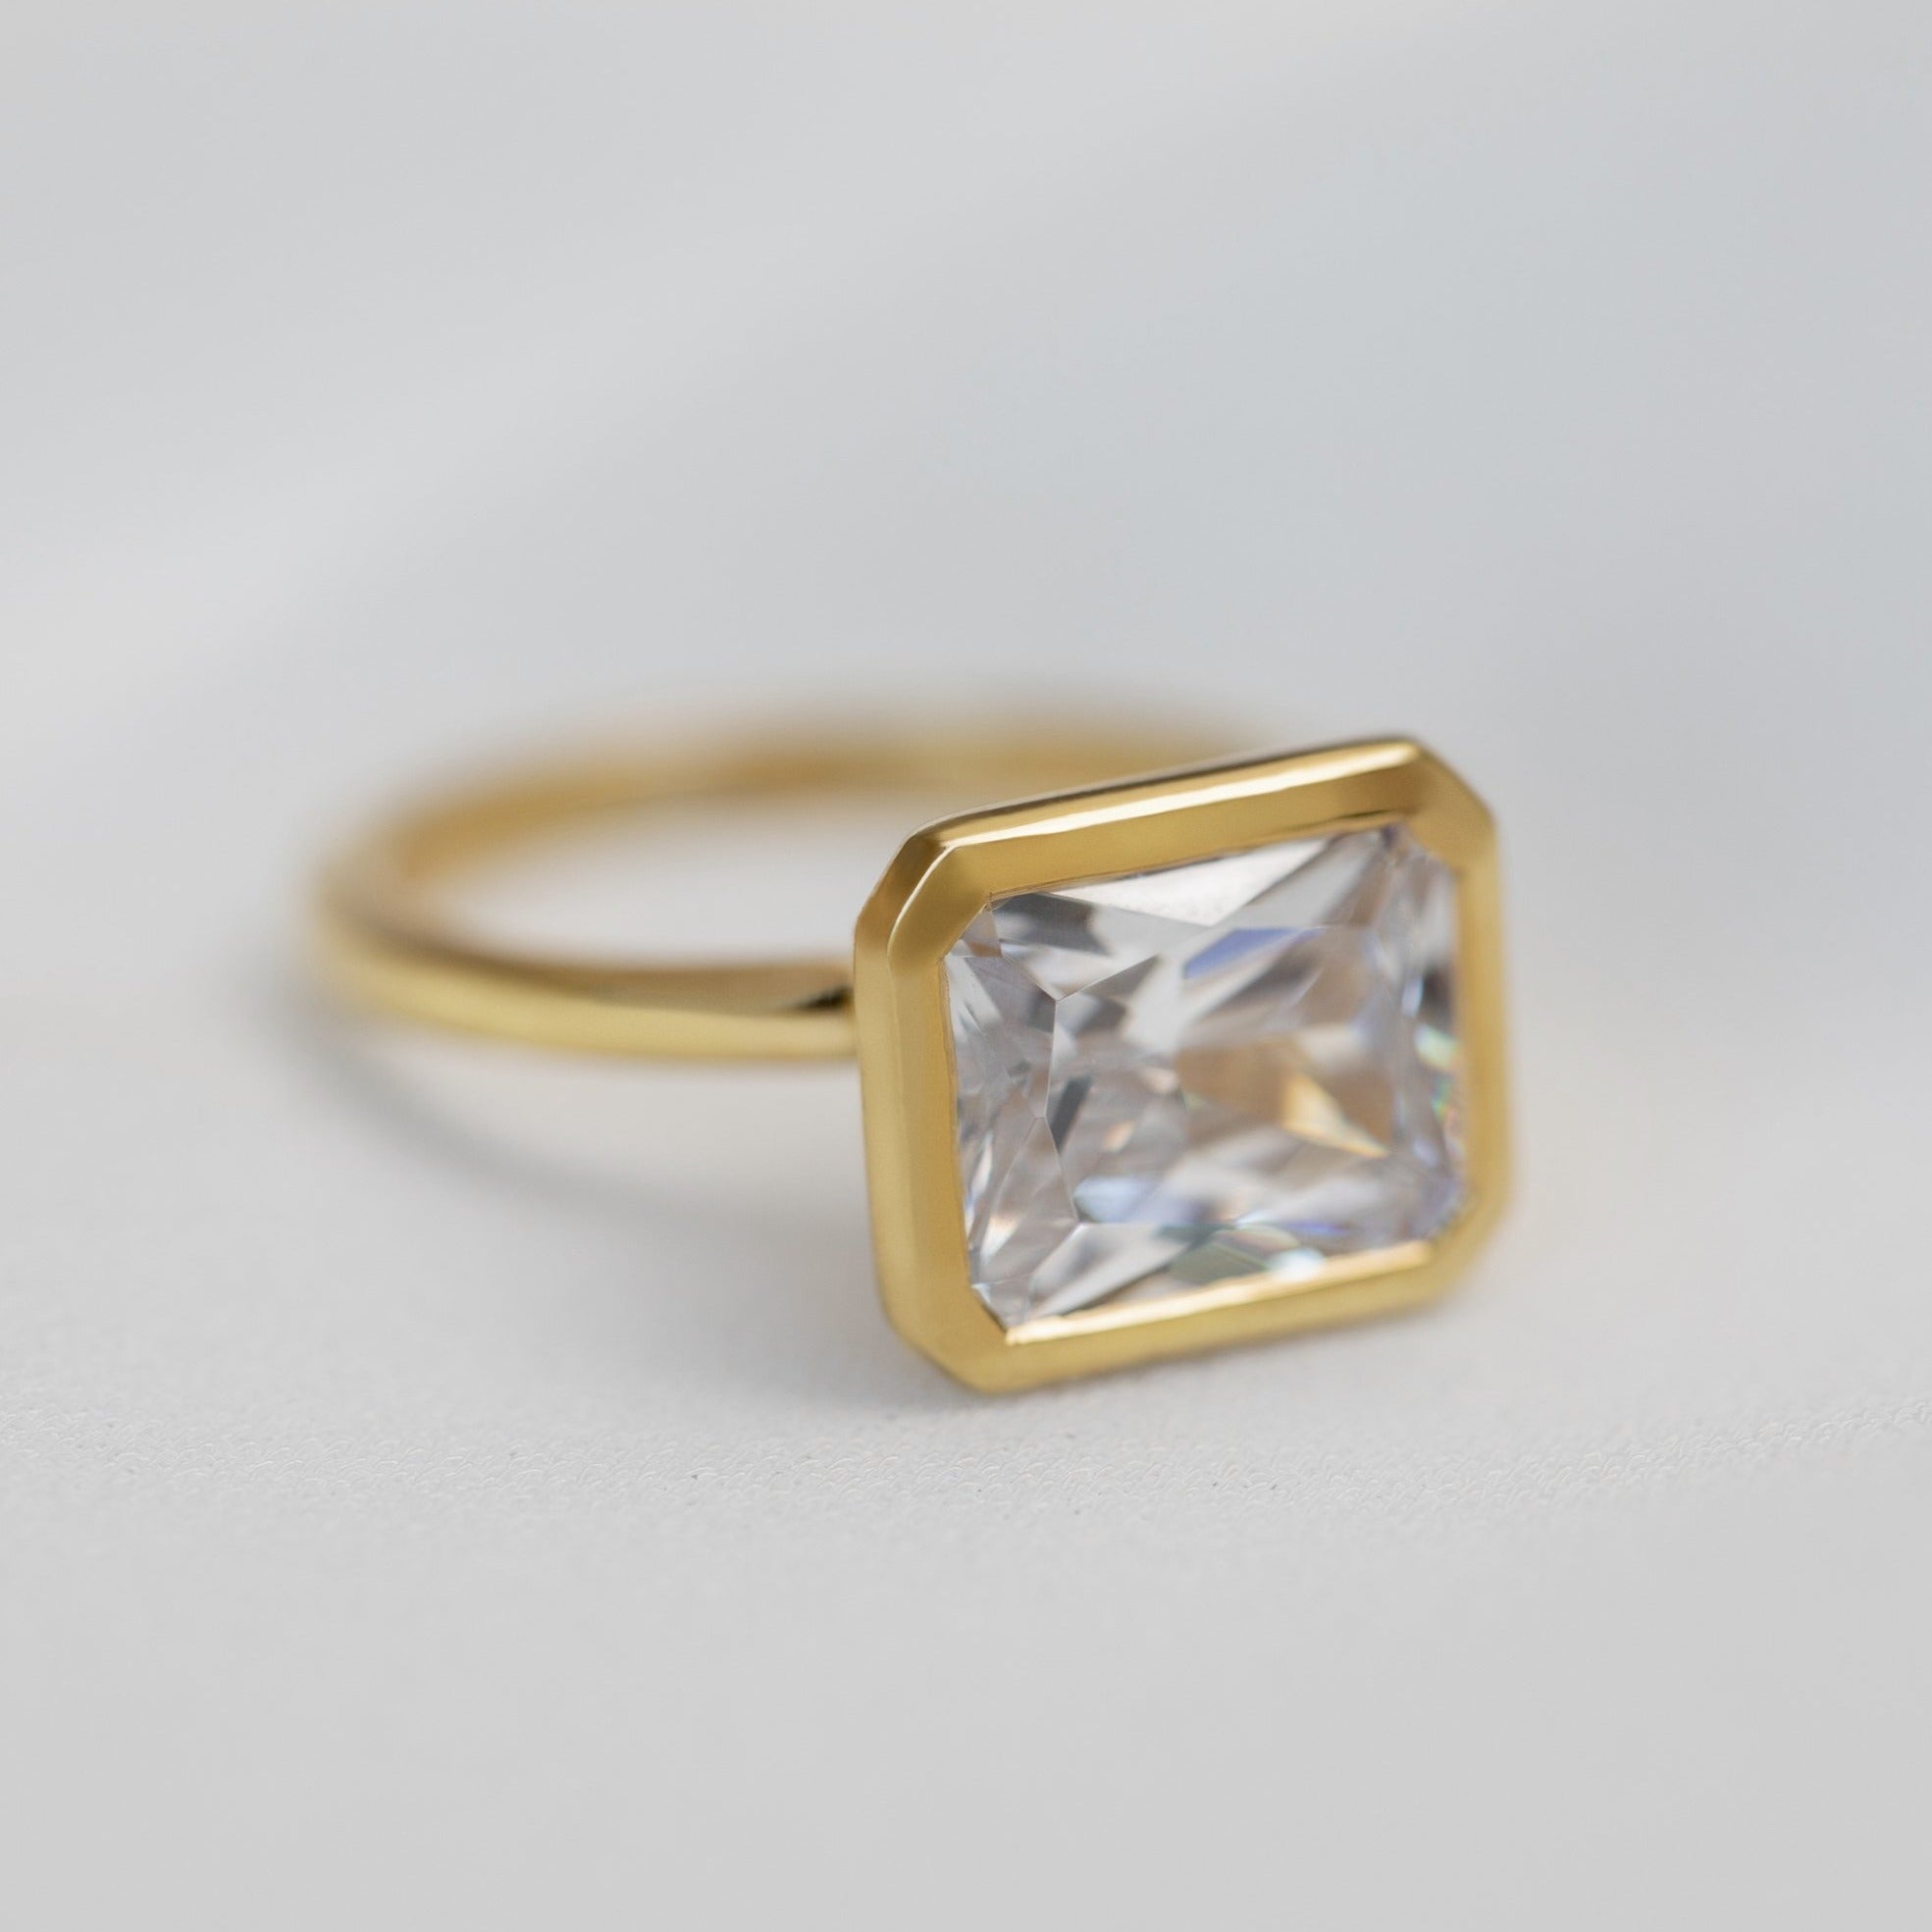 Brielle Strength Moissanite Ring In Gold